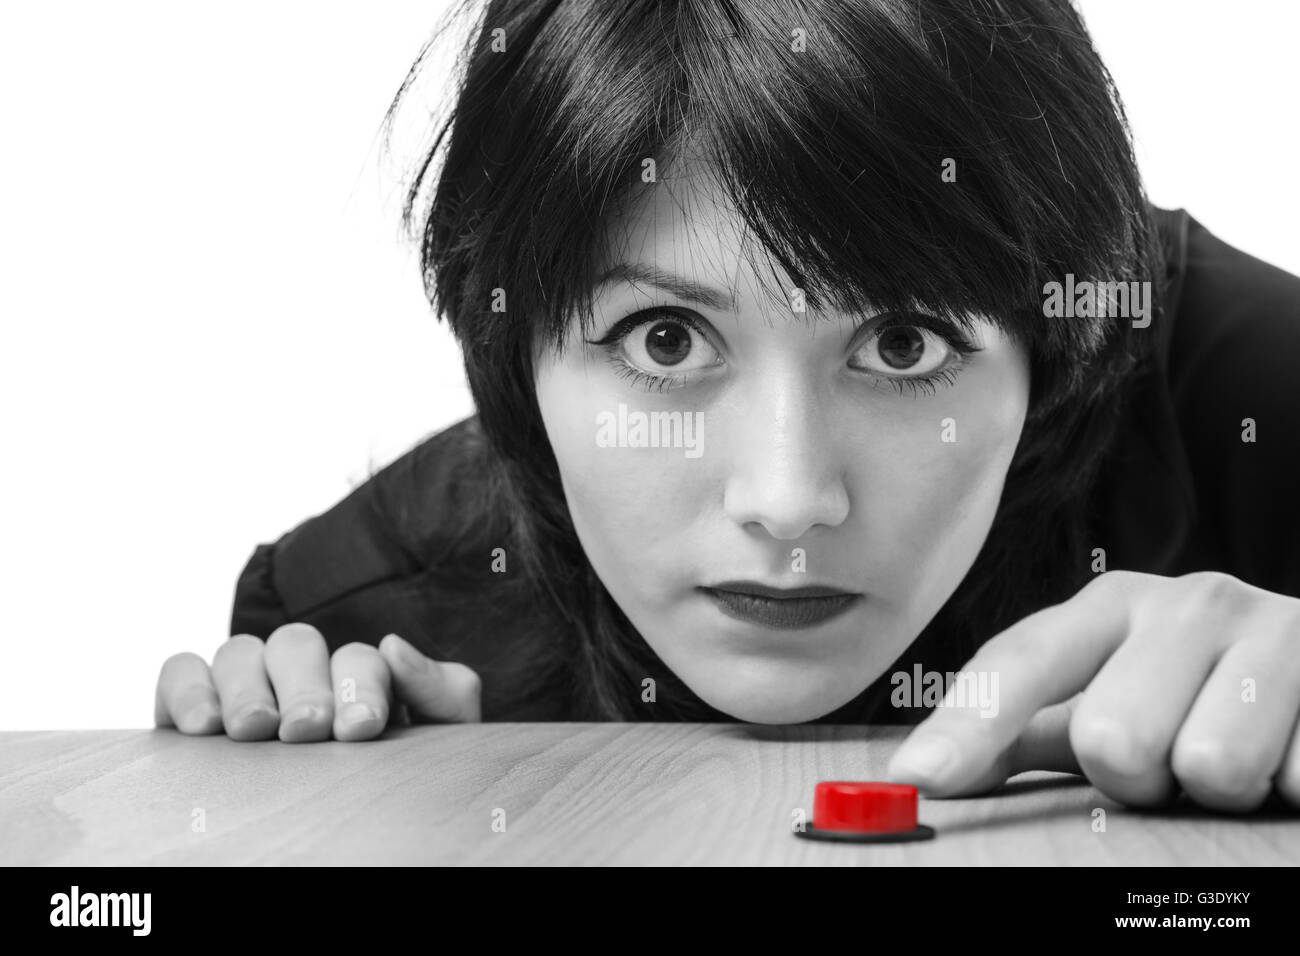 Close up studio shot of a young business model wearing a black blouse, ready to press a red button.  Isolated on white. Stock Photo